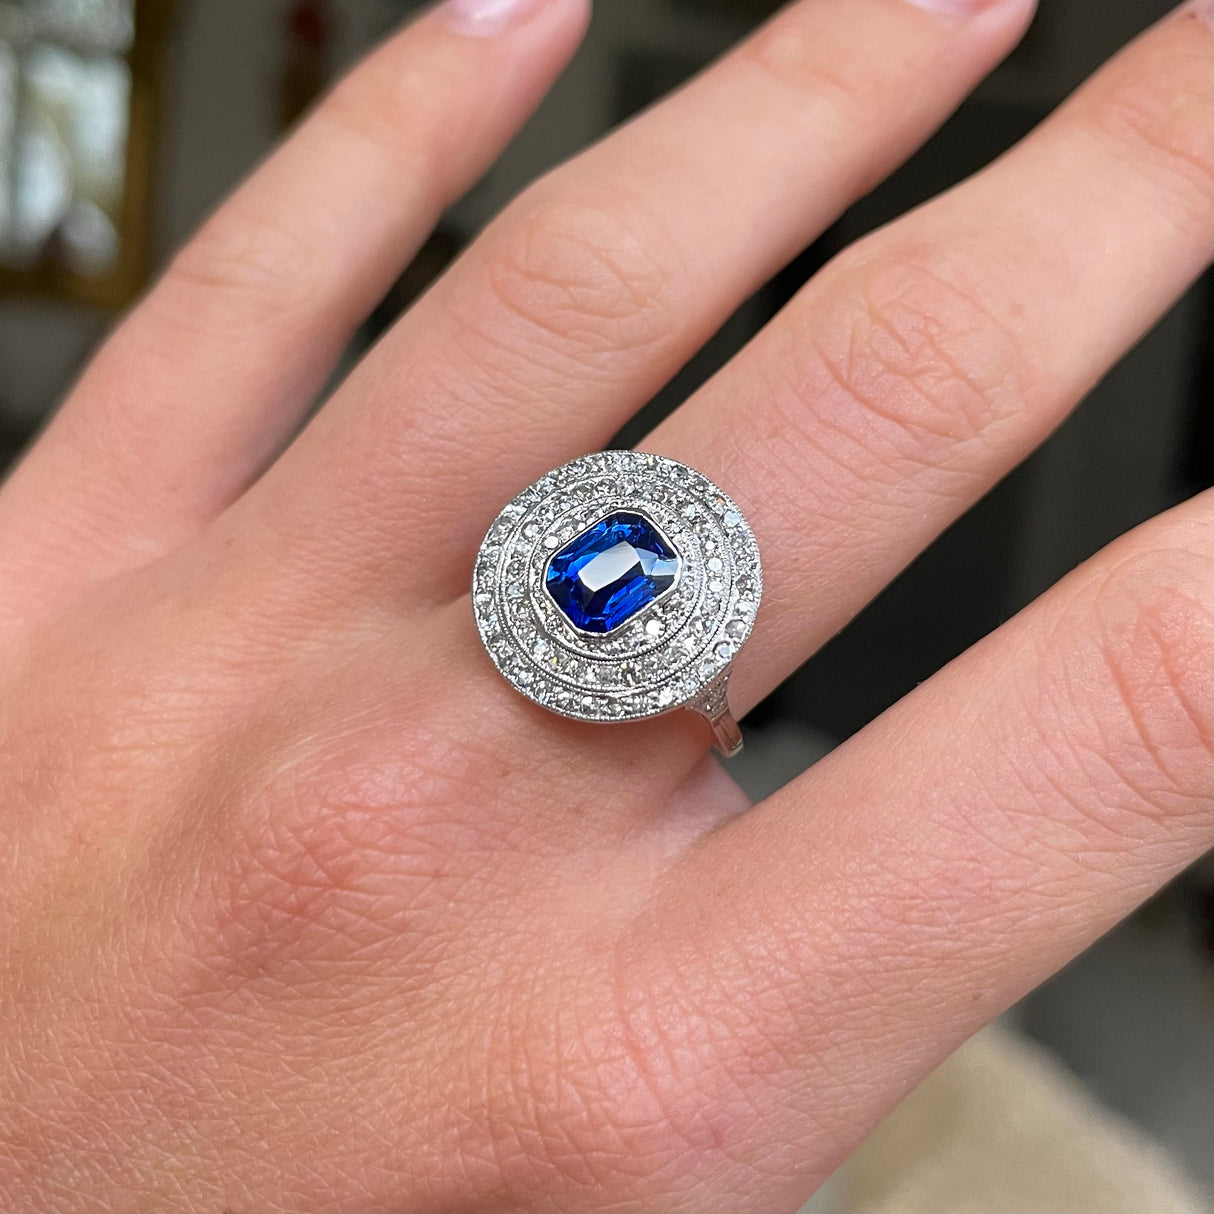 Sapphire and diamond target cluster ring, worn on hand.